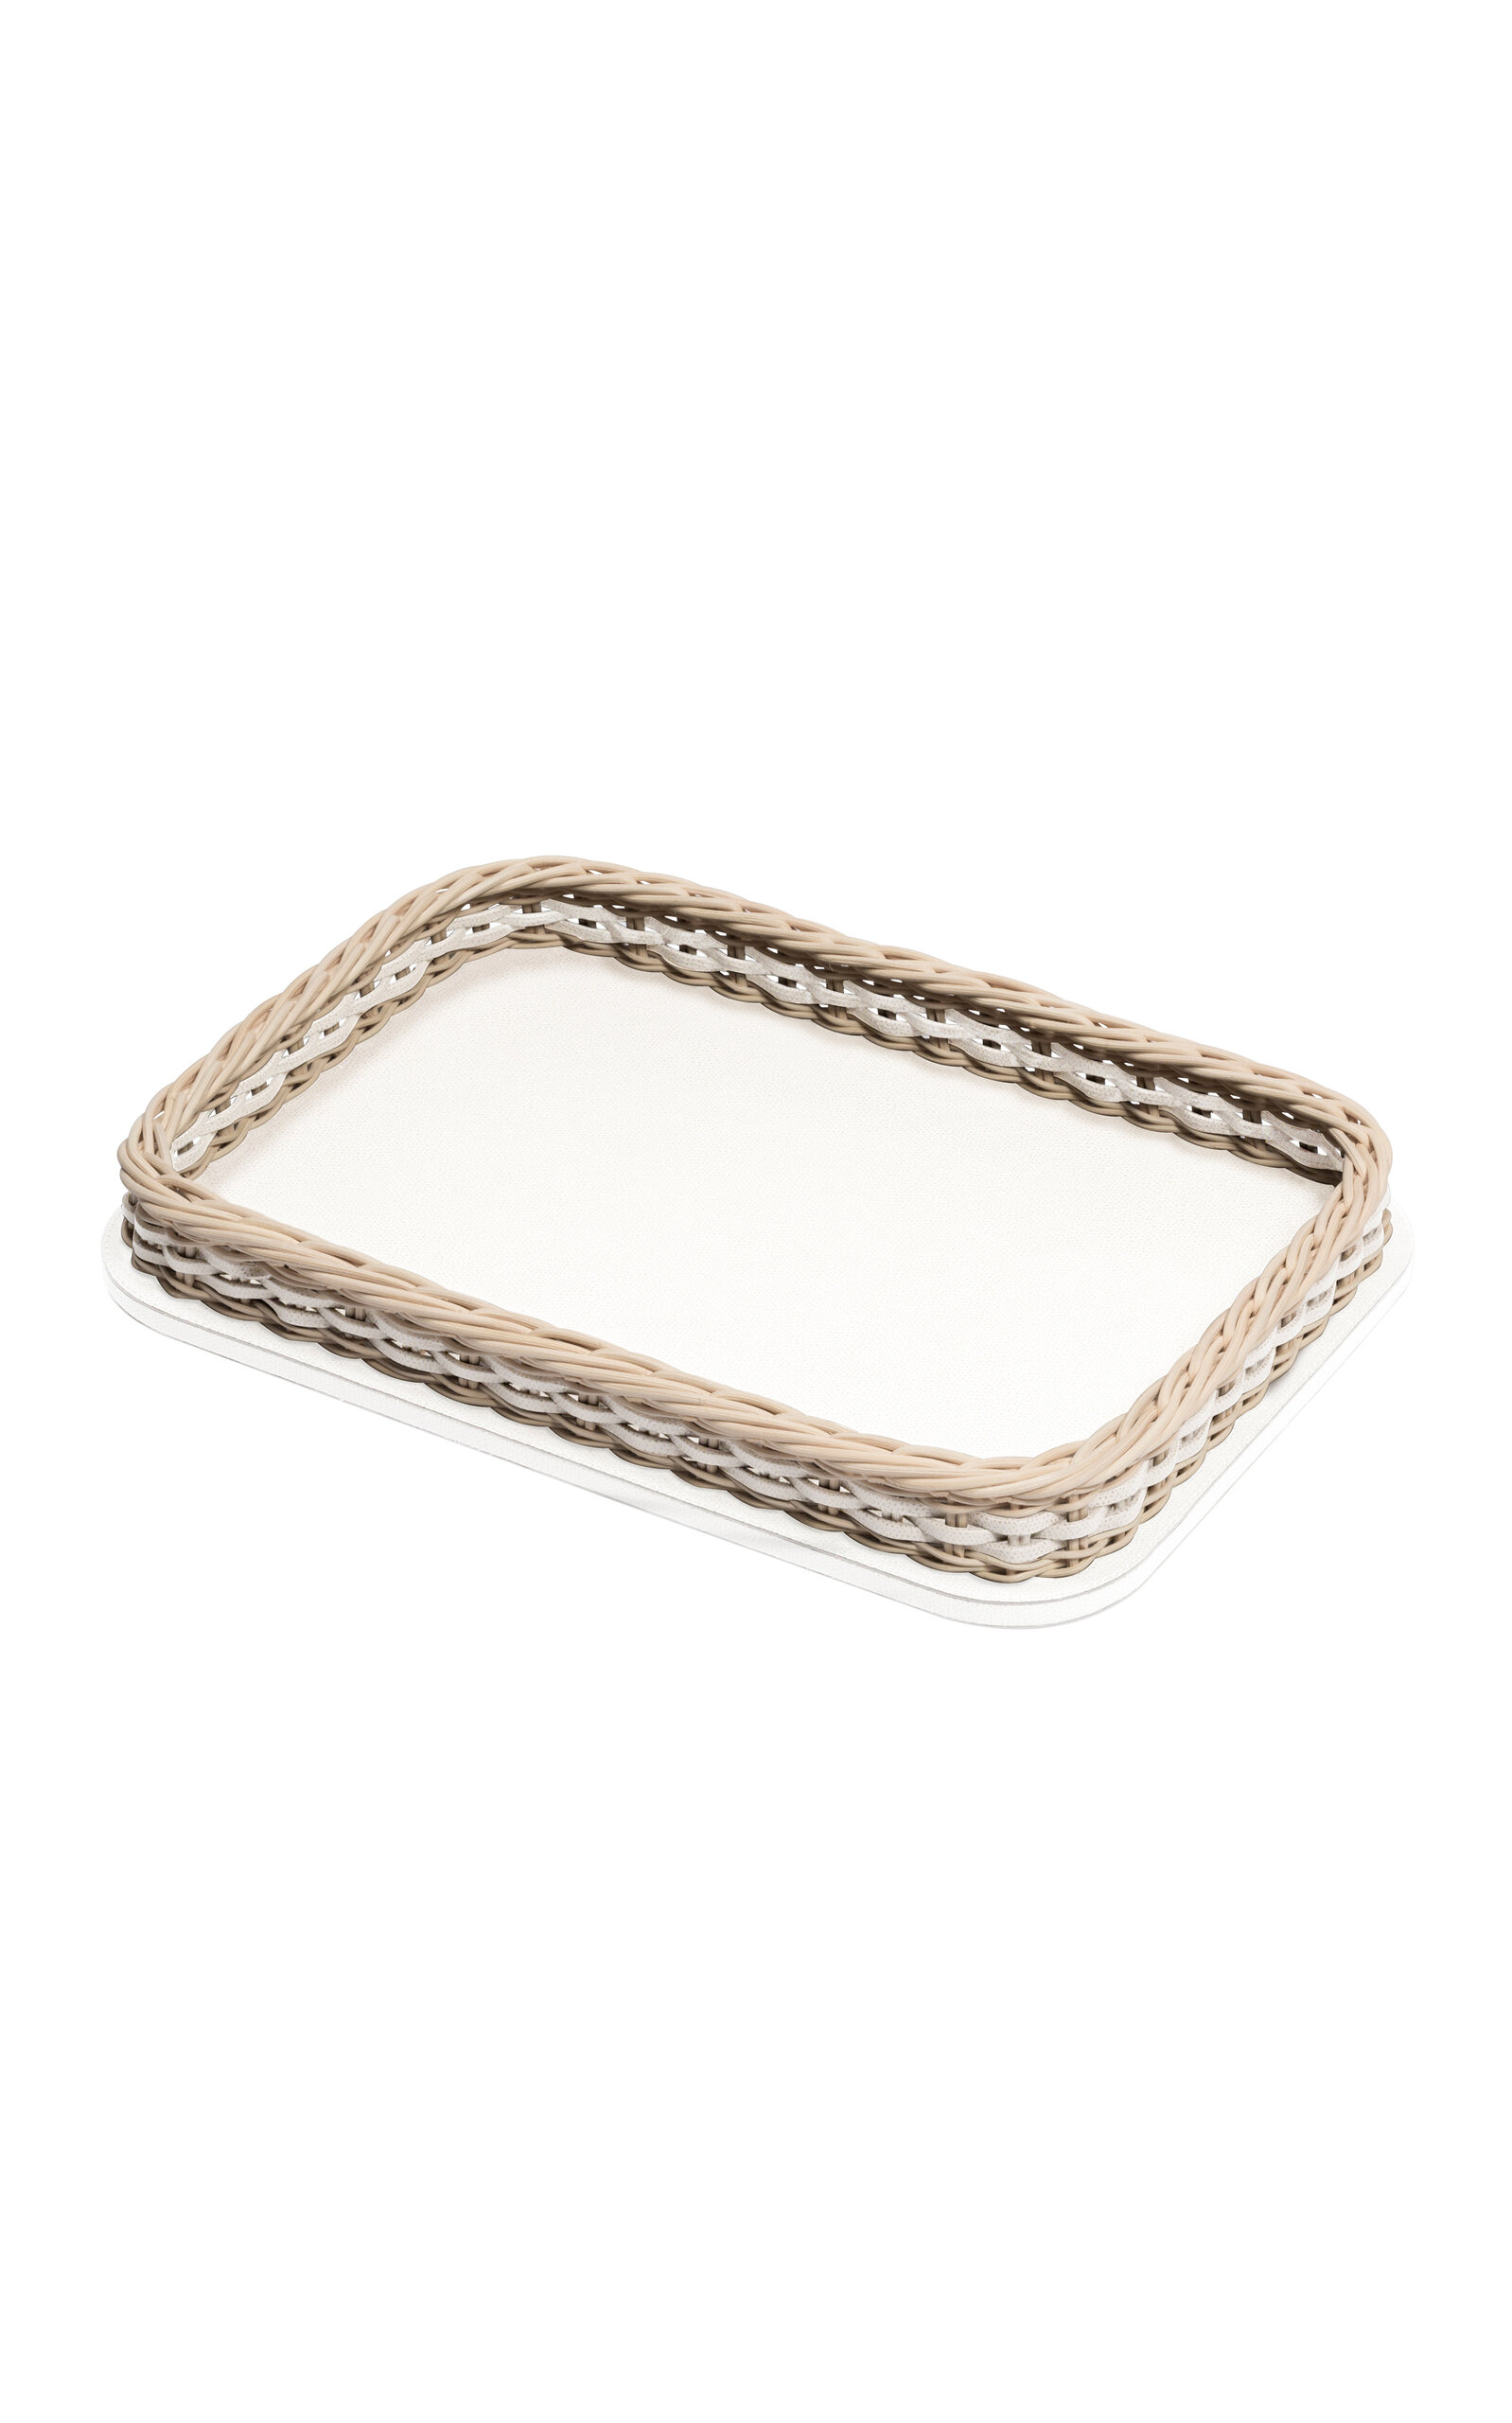 Giobagnara Orsay Small Leather; Rattan Serving Tray In Neutral